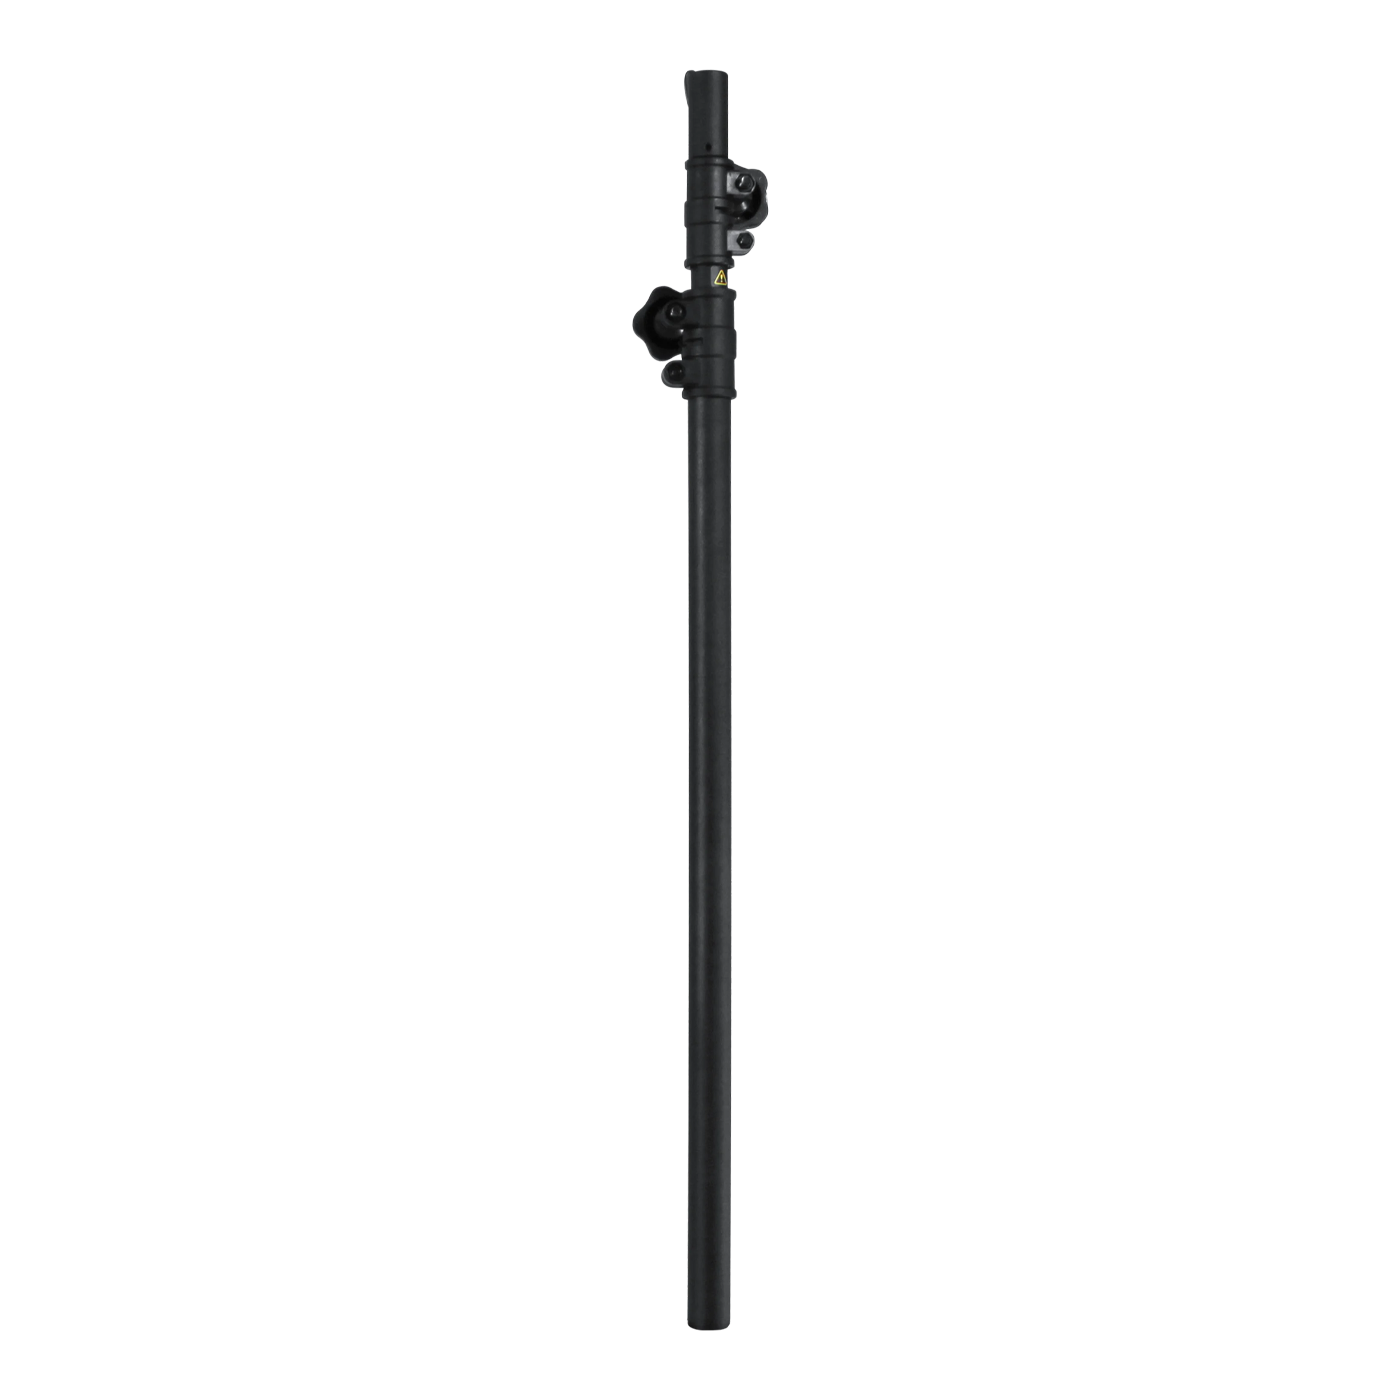 6.5ft Extension Pole - Standard Series